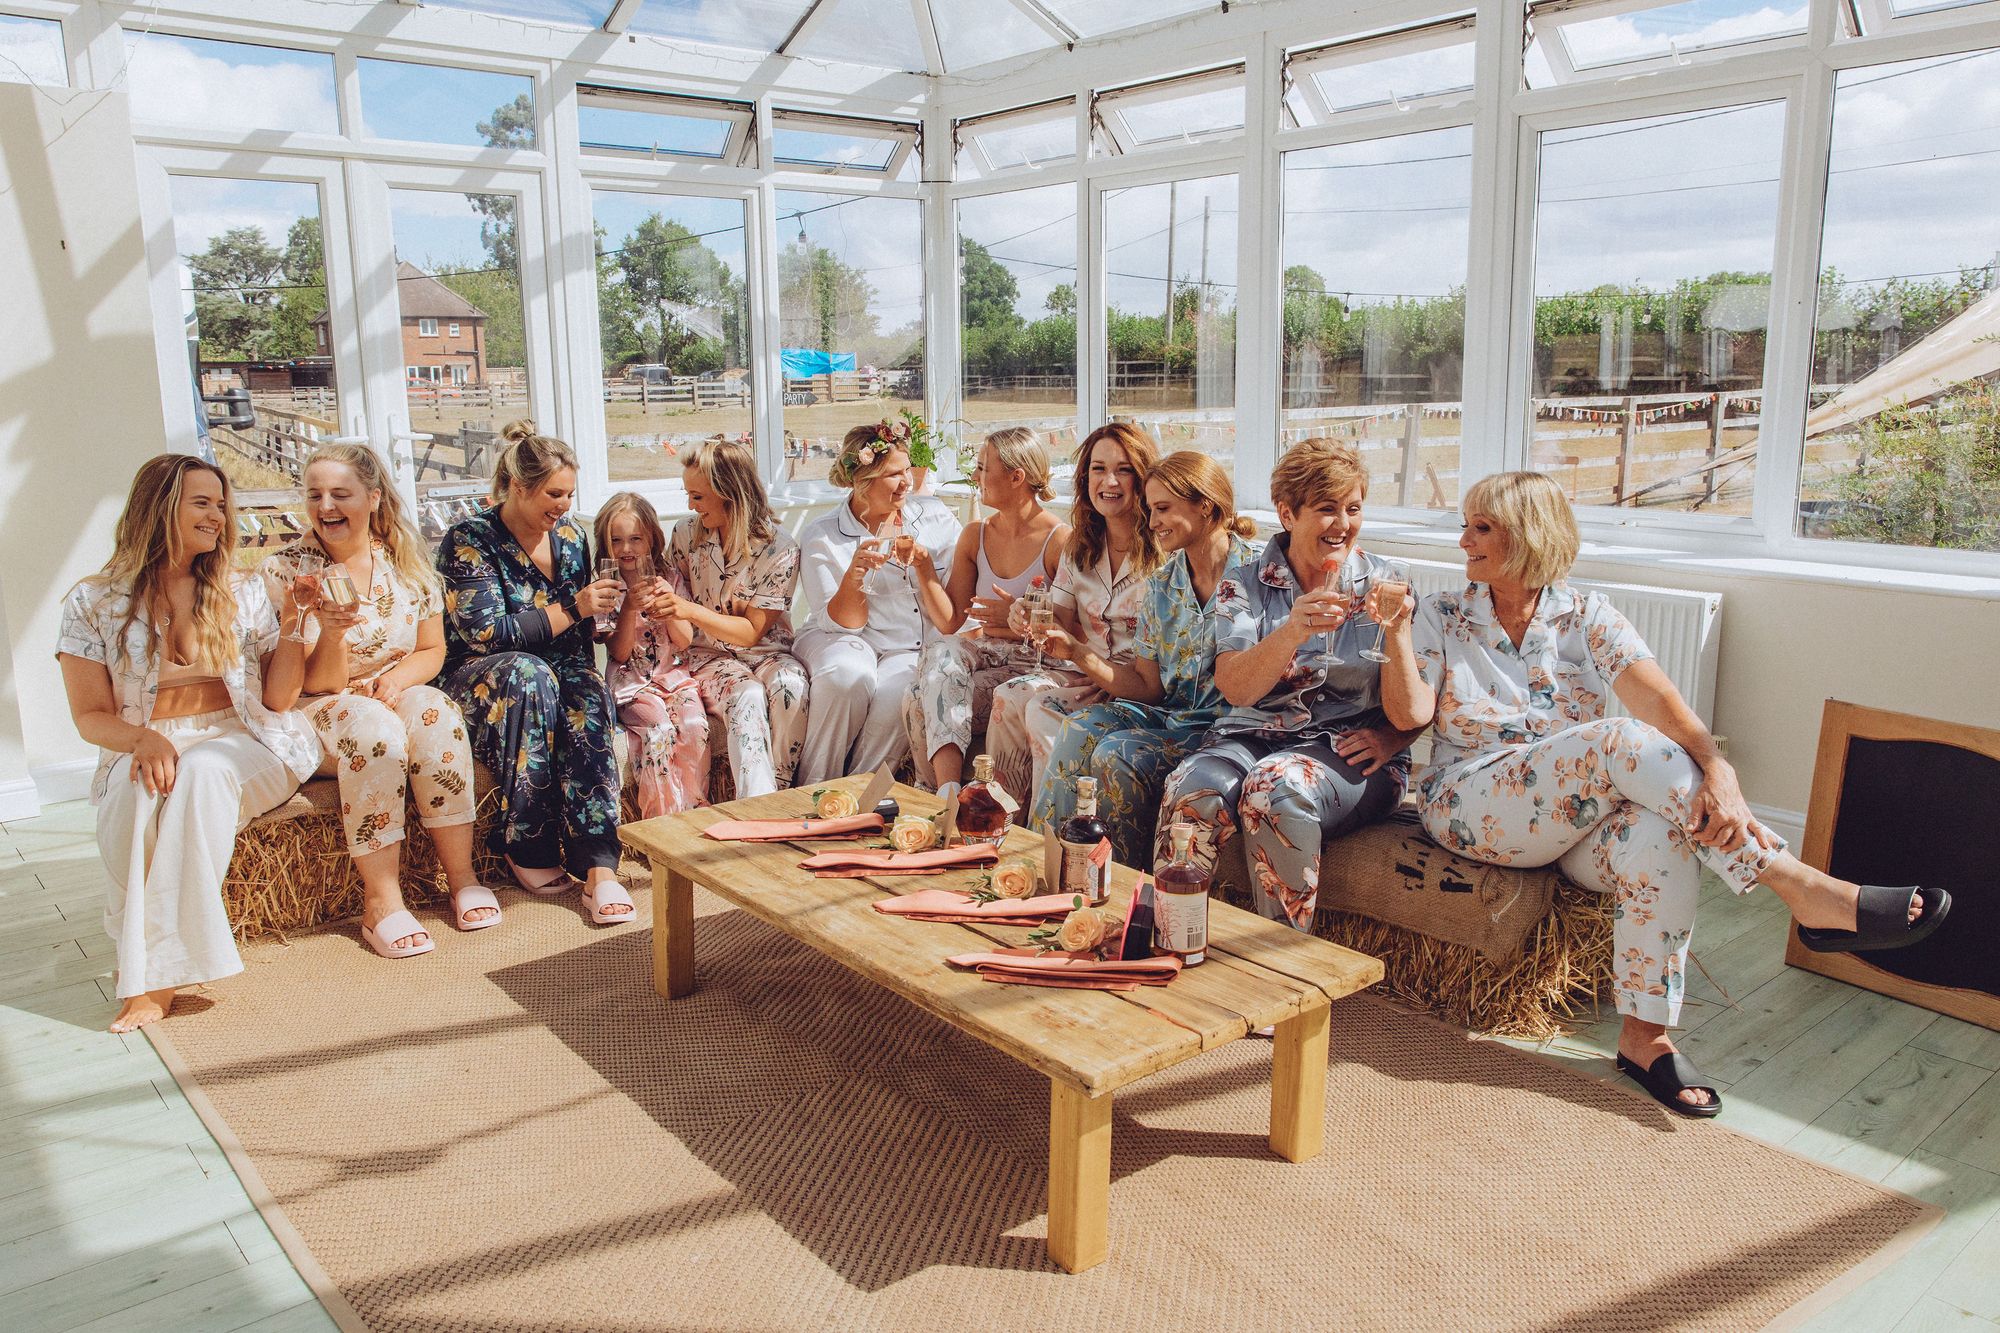 Nor and her bridesmaids in matching pajamas toasting the wedding with prosecco in the conservatory. Photo thanks to Fordtography.